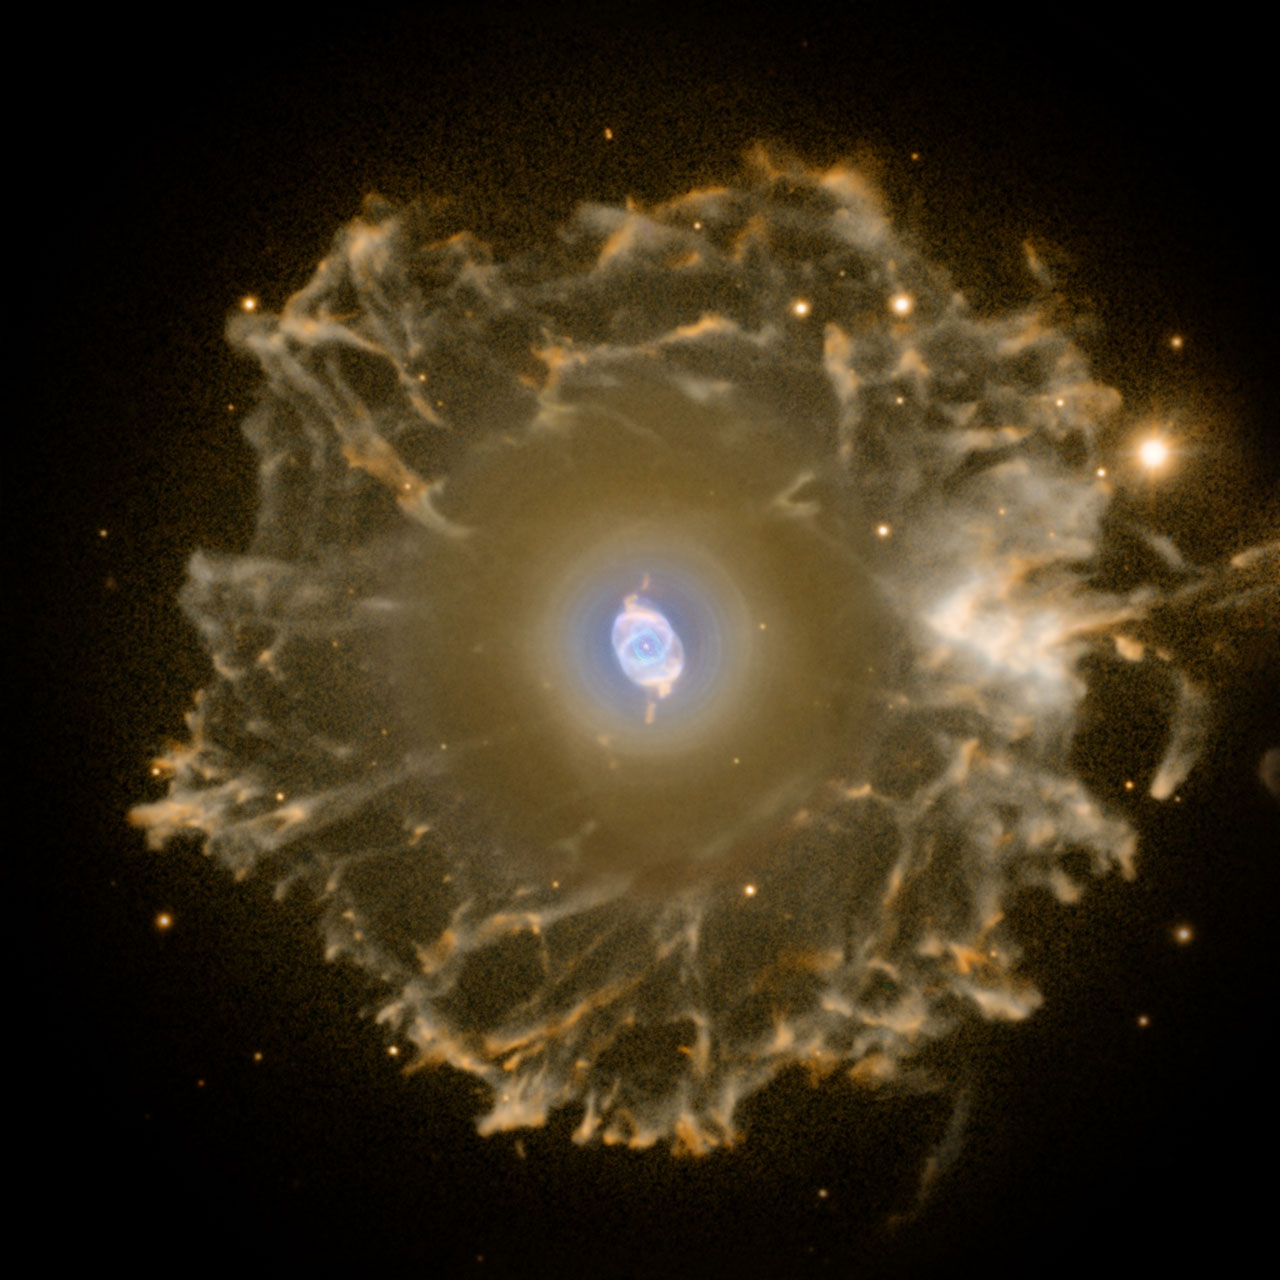 Wider angle view of the Cat's Eye Nebula